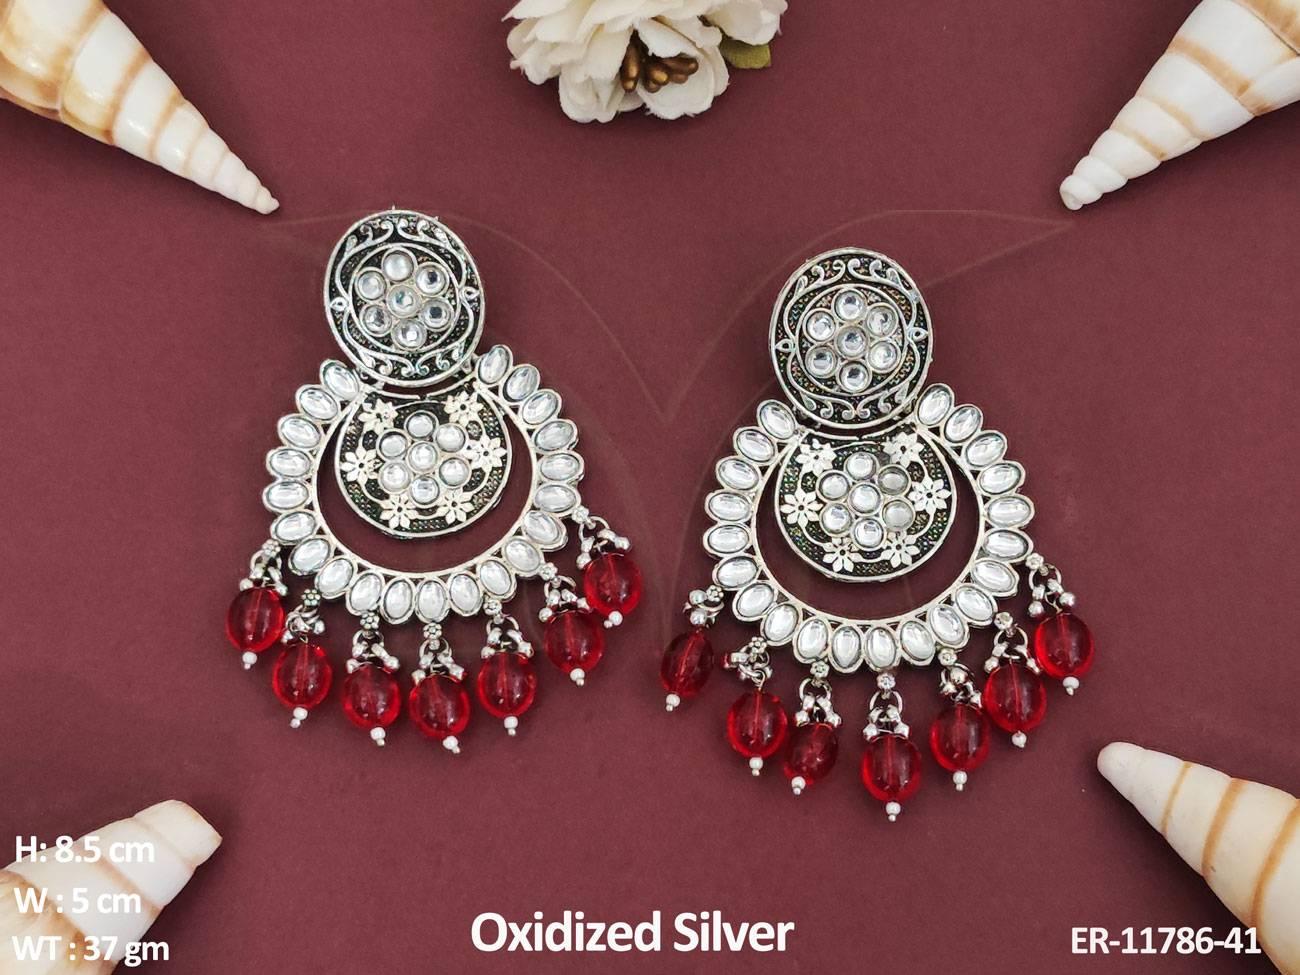 Perfect for any occasion, this set is a must-have for jewelry lovers.